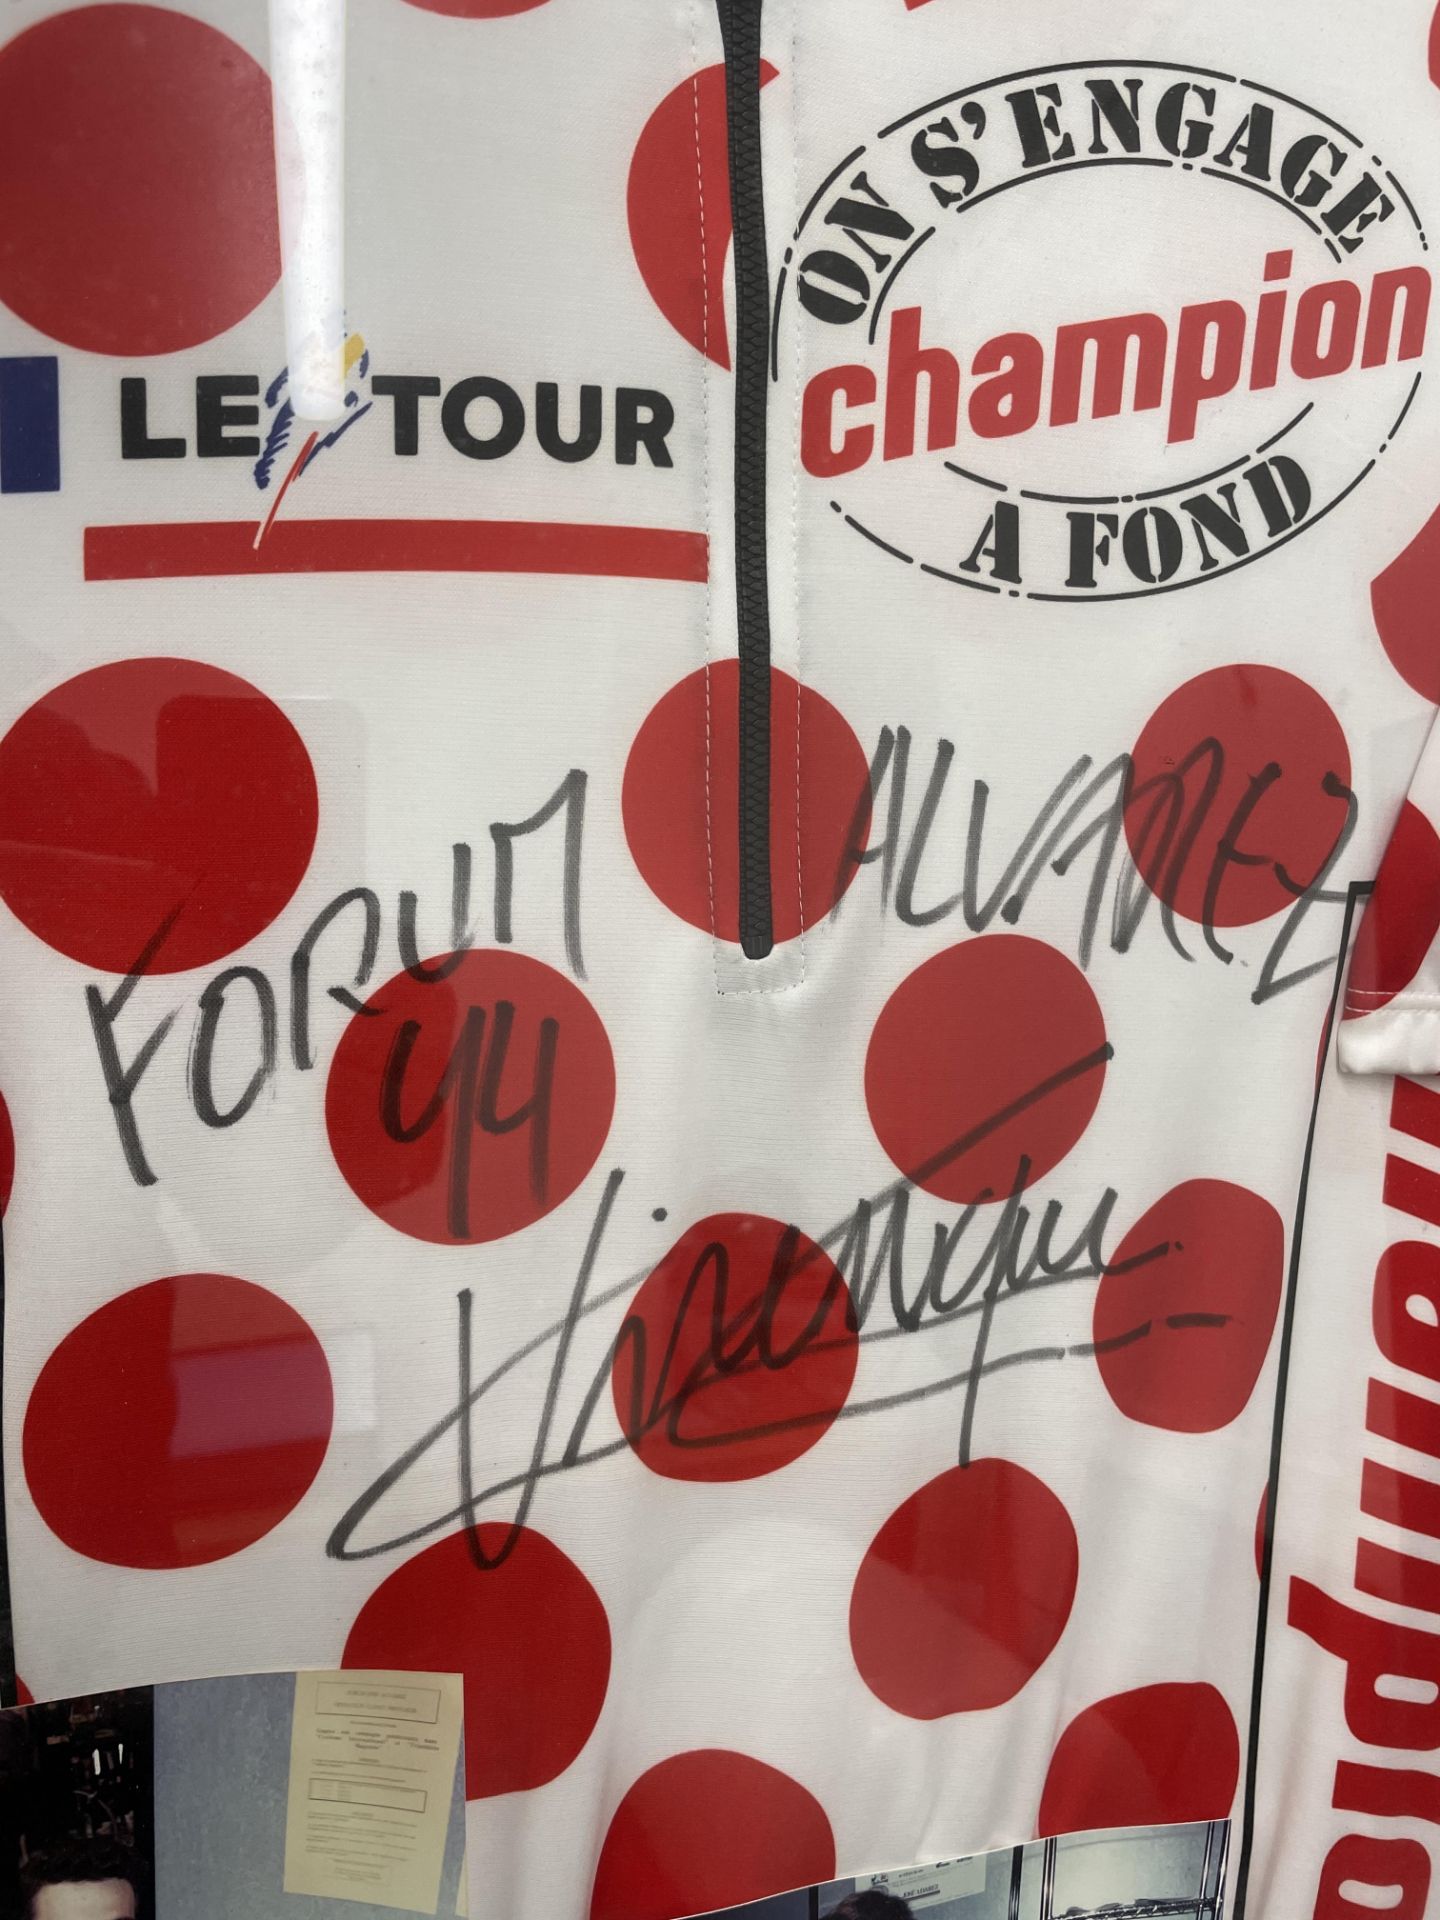 Richard Virenque Framed & Signed On S'engage Champion A Fond Cycling Jersey. Best Climber Tour de Fr - Image 2 of 5